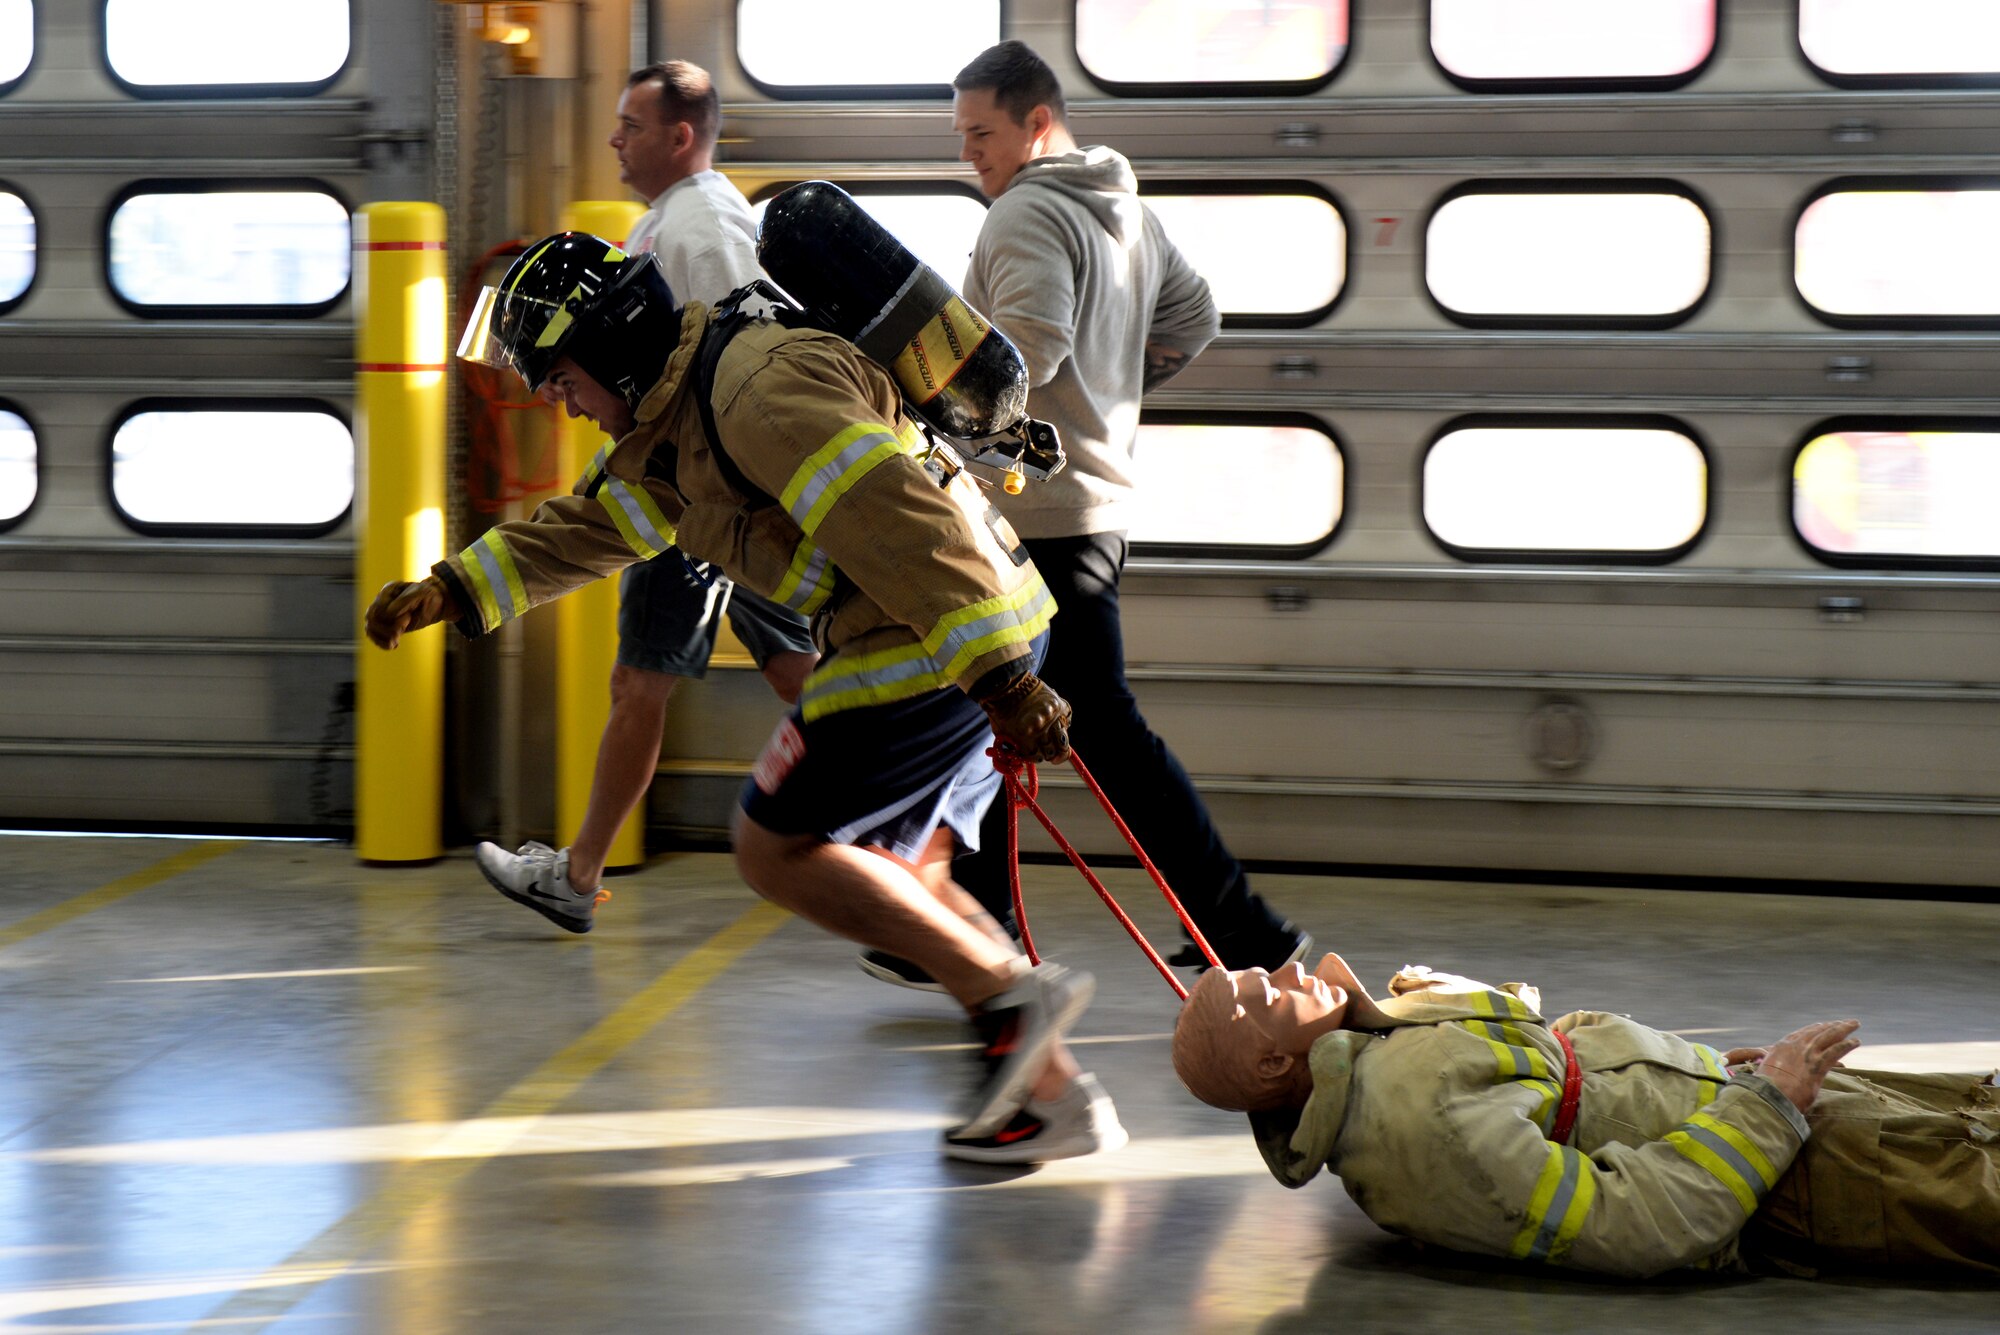 An Airman drags a dummy at the 28th Civil Engineer Squadron Fire Department at Ellsworth Air Force Base, S.D., Oct. 4, 2019. The physical exercises Airmen did during the Firefighter Challenge simulate what firefighters do during technical training in preparation for their operational duties at their installations. (U.S. Air Force photo by Airman Quentin K. Marx)